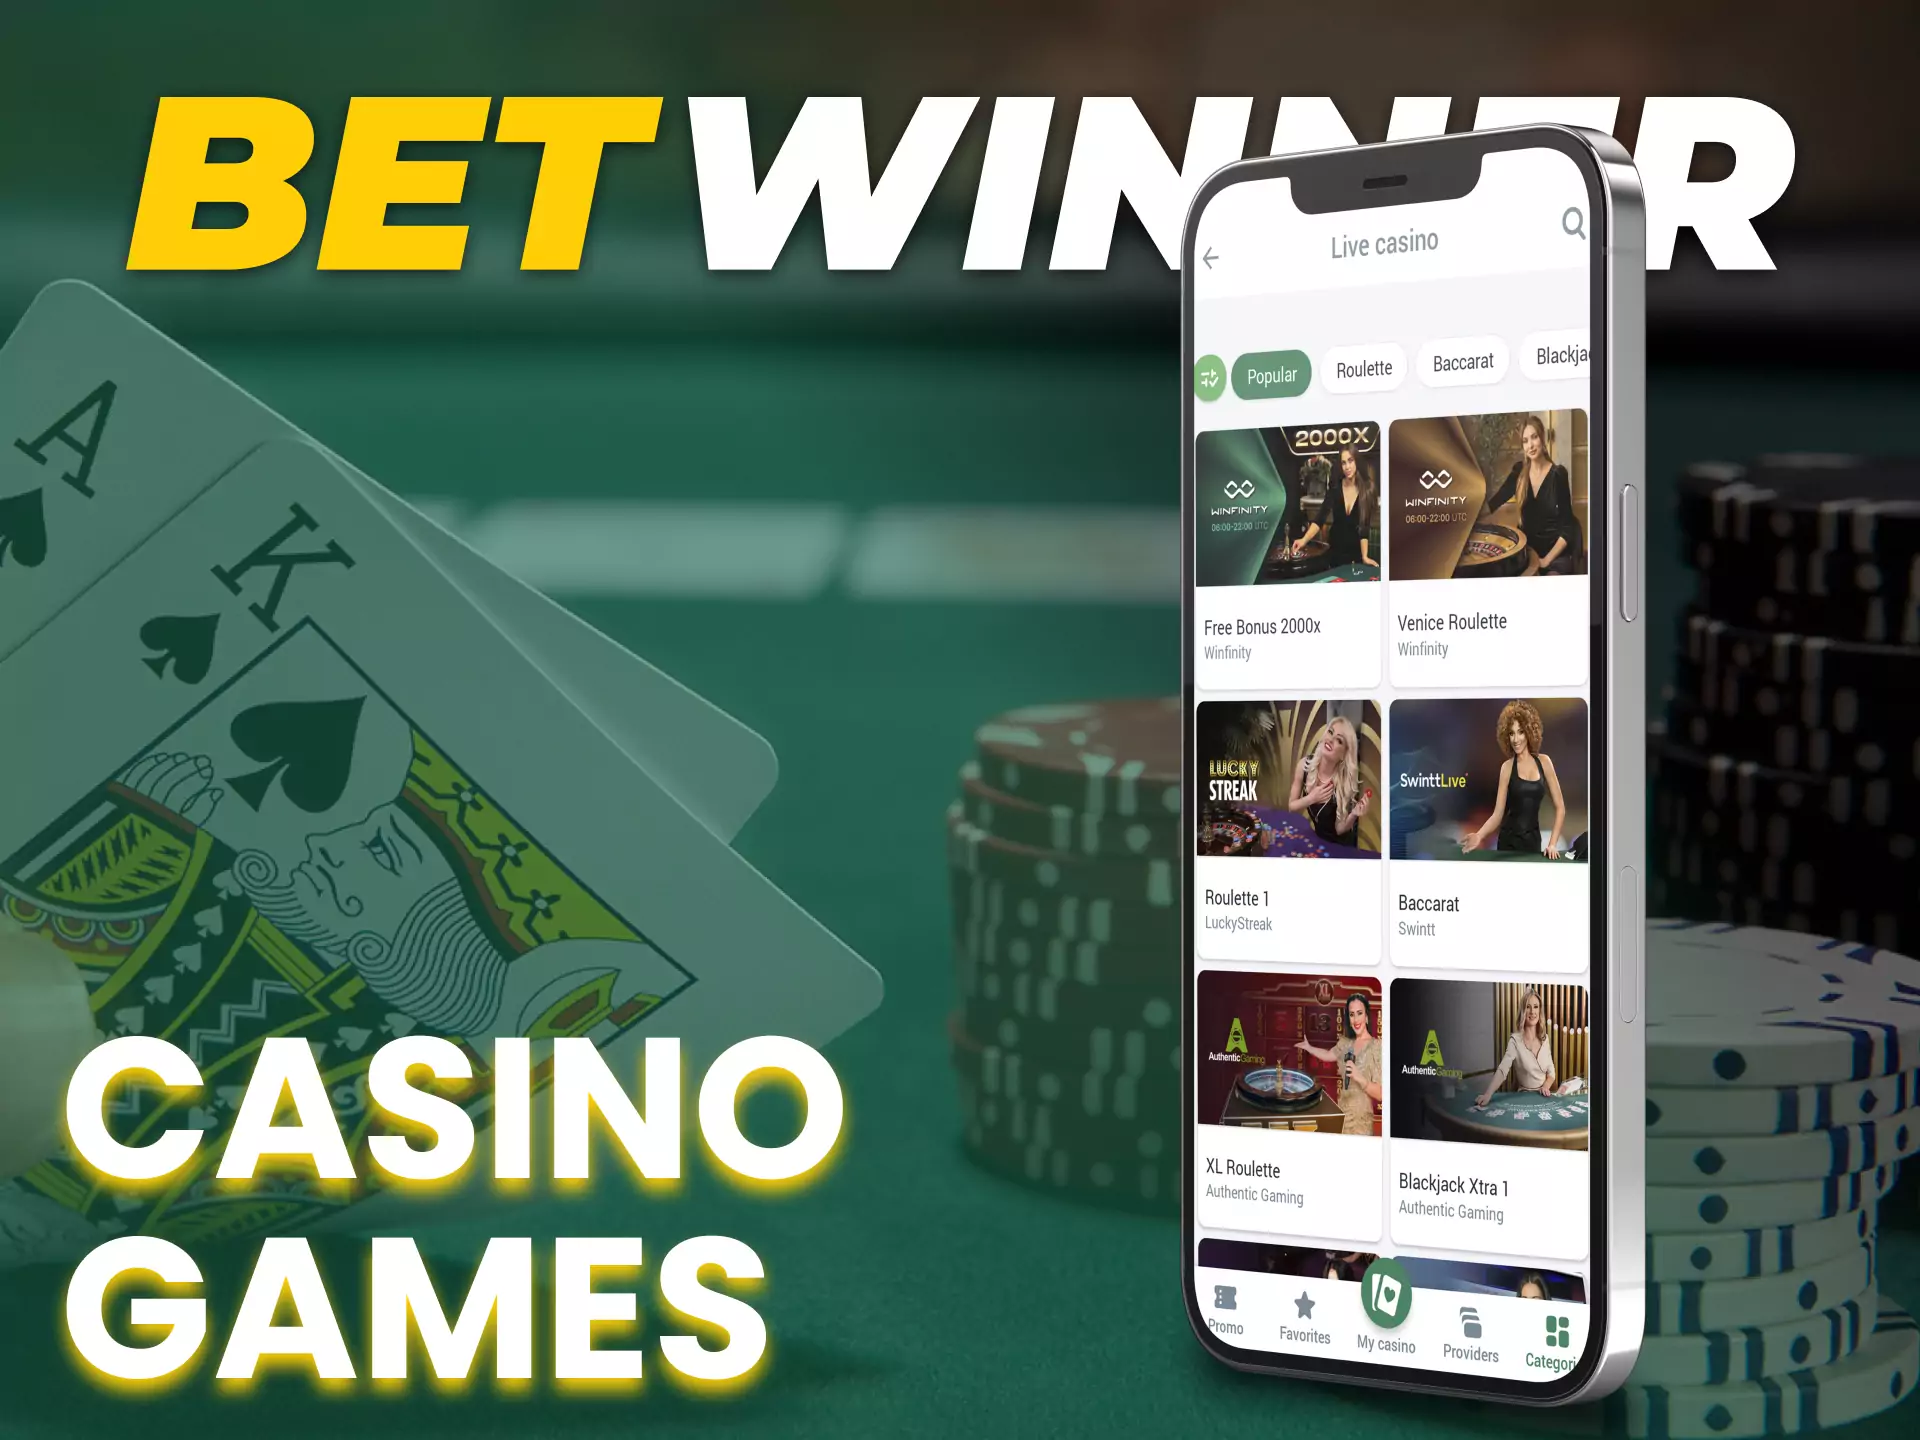 In the Betwinner app, play exciting casino games.